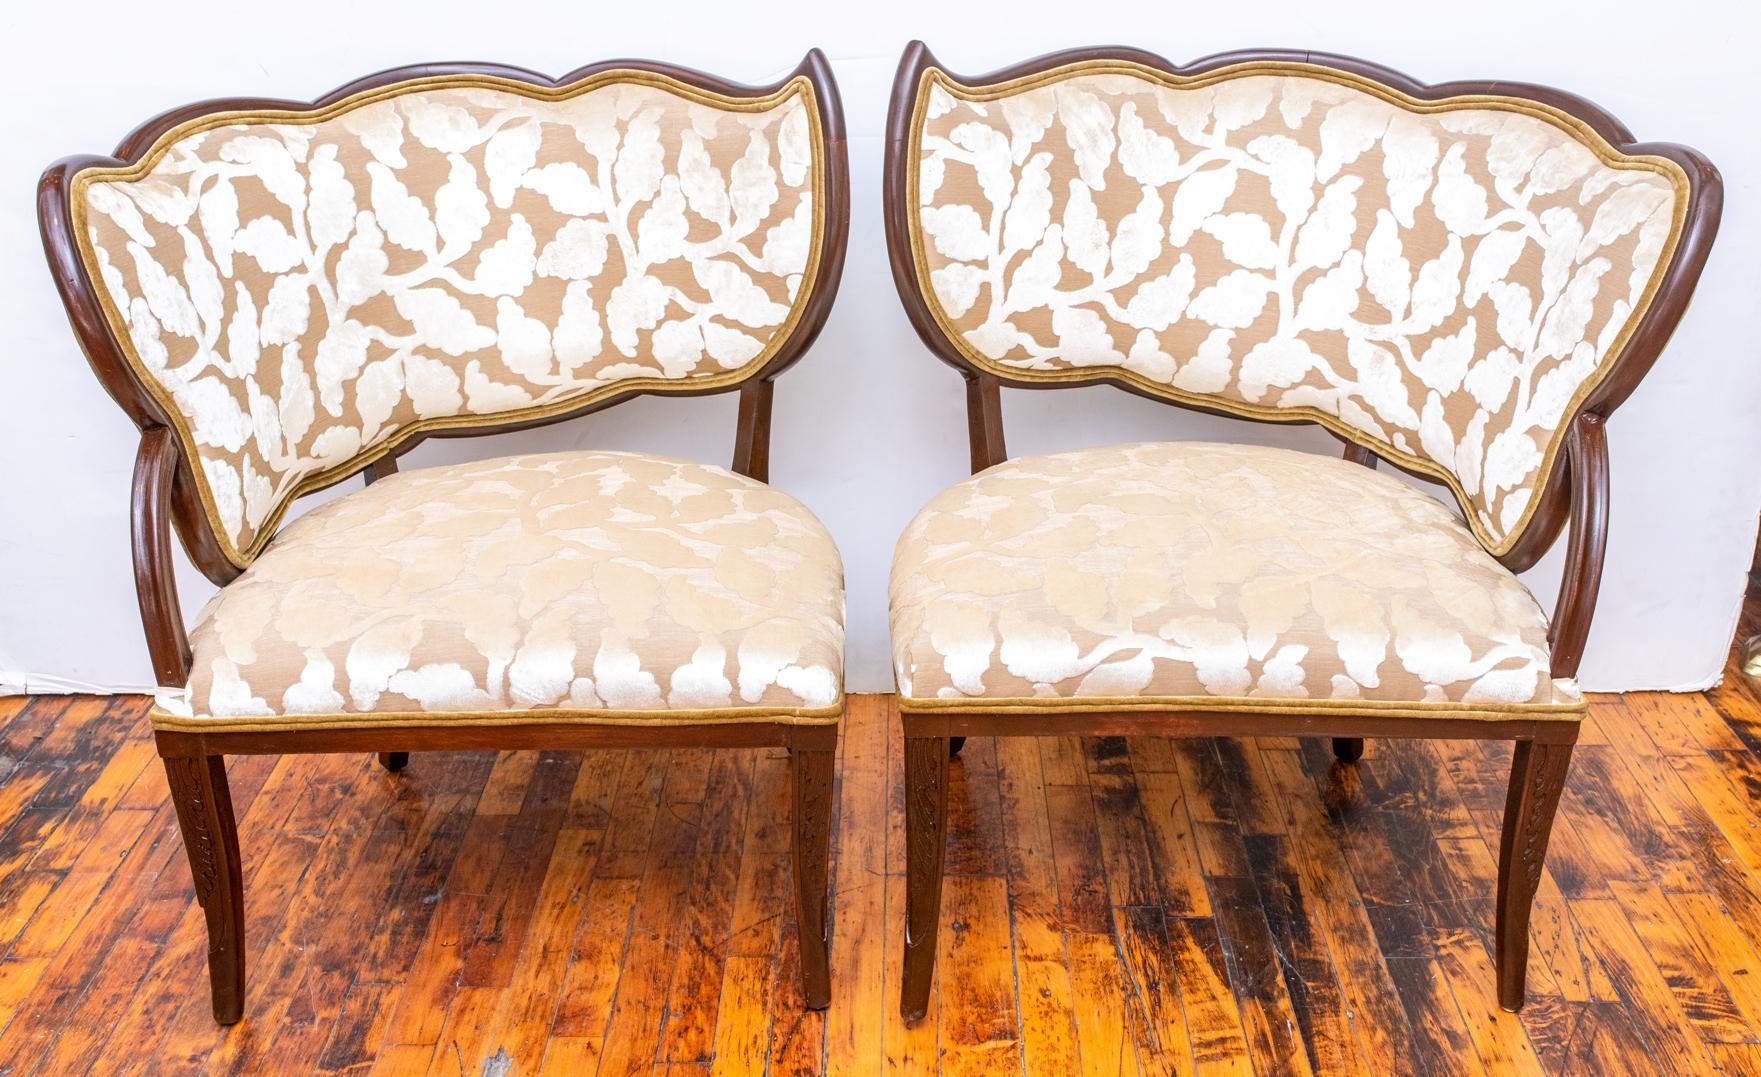 Pair of Grosfeld House mahogany framed leaf chairs, recently upholstered in a champagne cut velvet with a leaf pattern and contrasting velvet on back. Made in the USA in the 1940s.